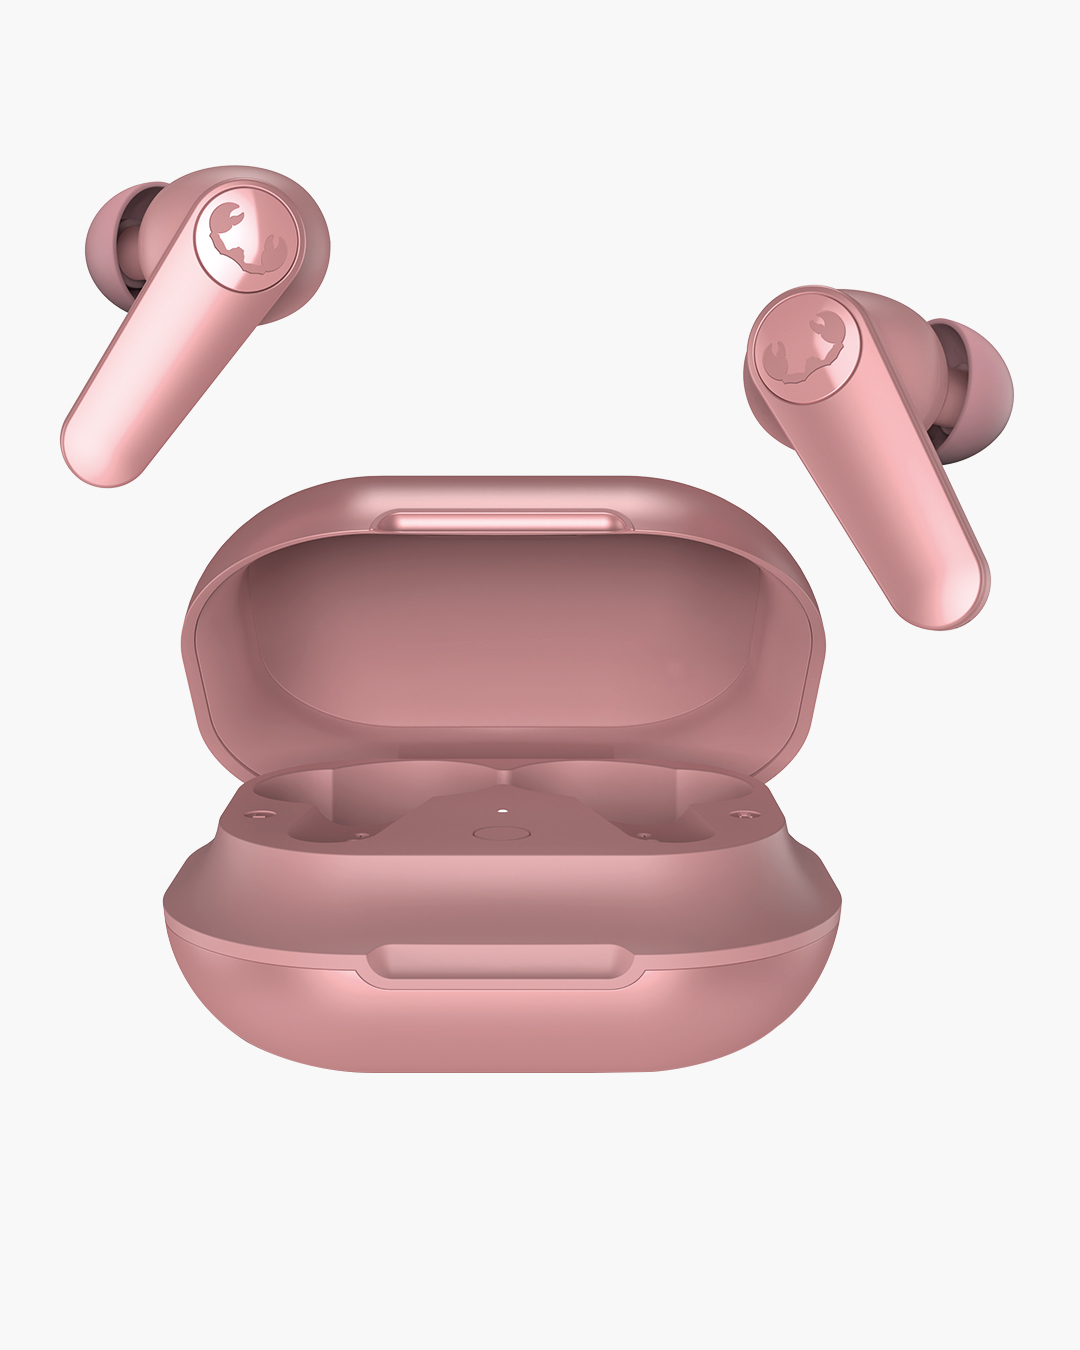 Fresh 'n Rebel - Twins ANC - True Wireless In-ear headphones with active noise cancelling - Dusty Pink